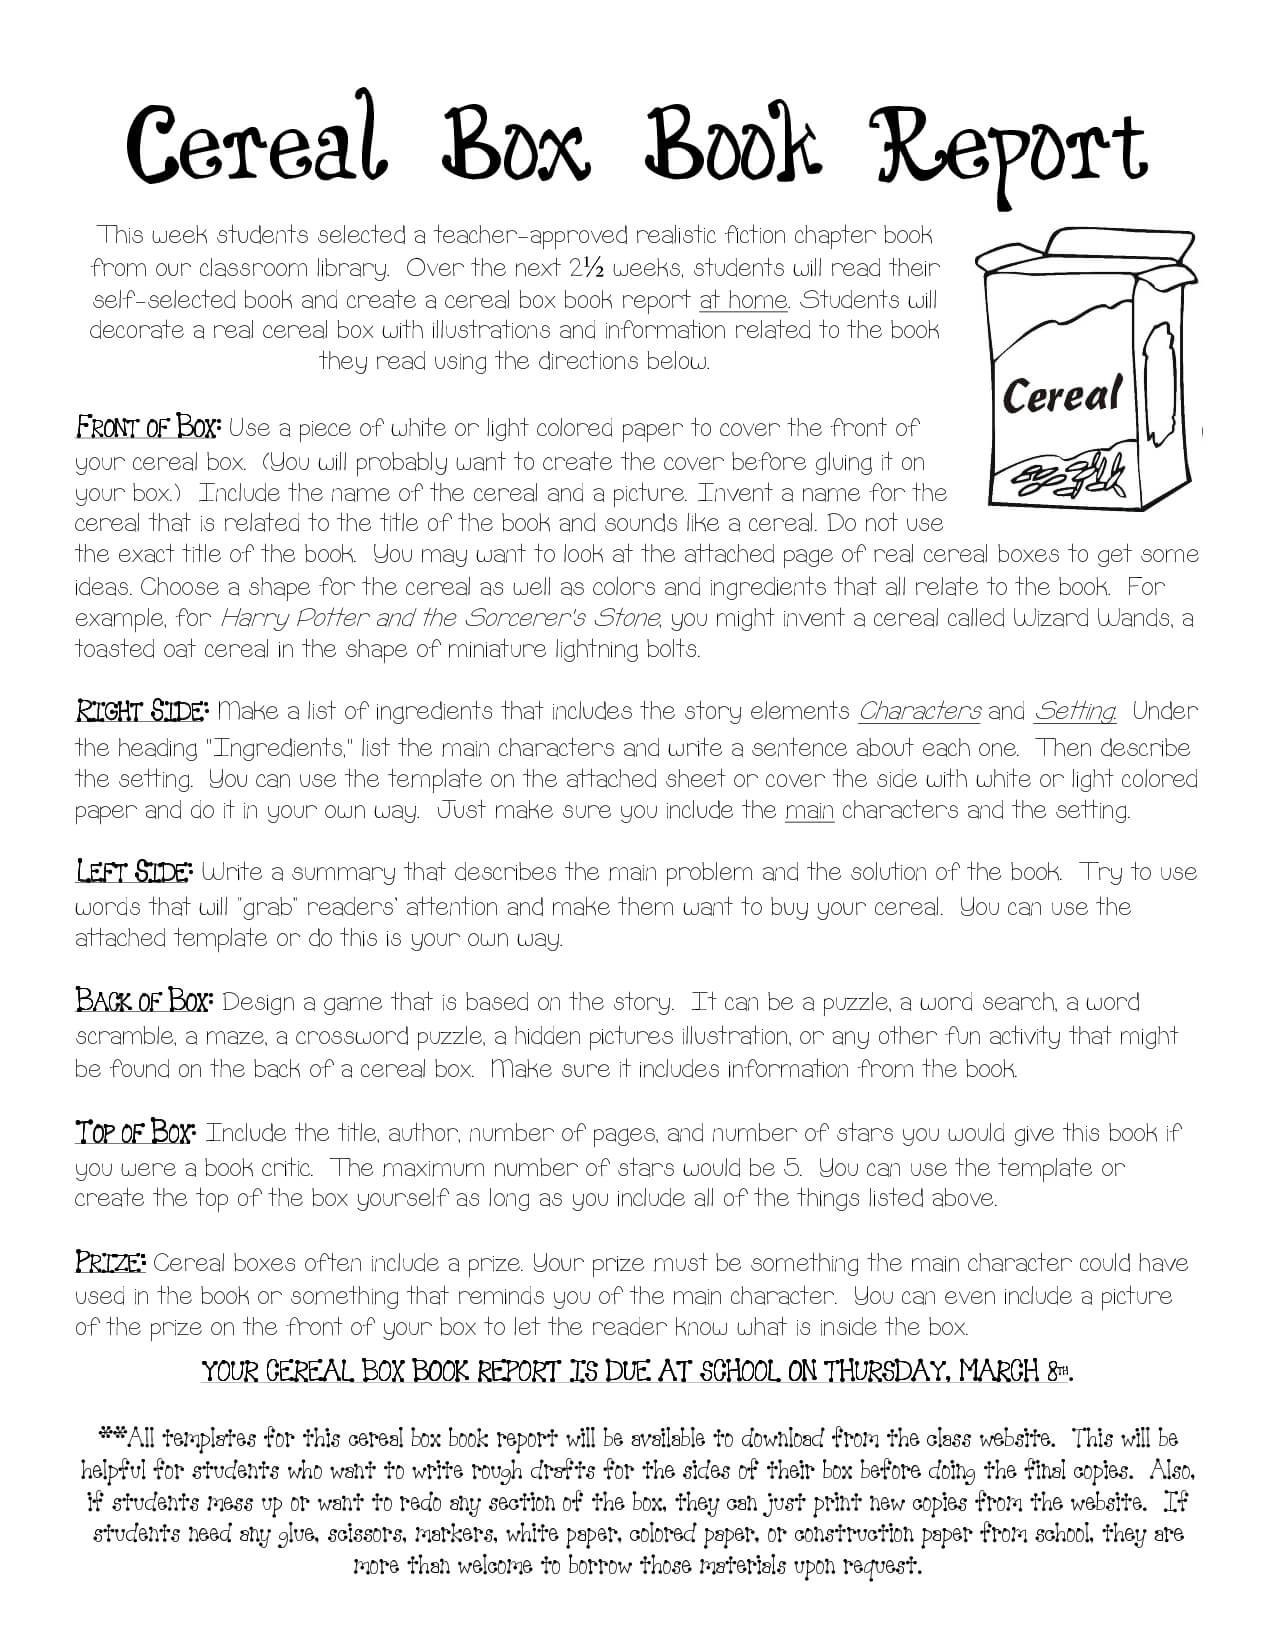 Cereal Box Book Report Instructions | Cereal Box Book Report Throughout Cereal Box Book Report Template